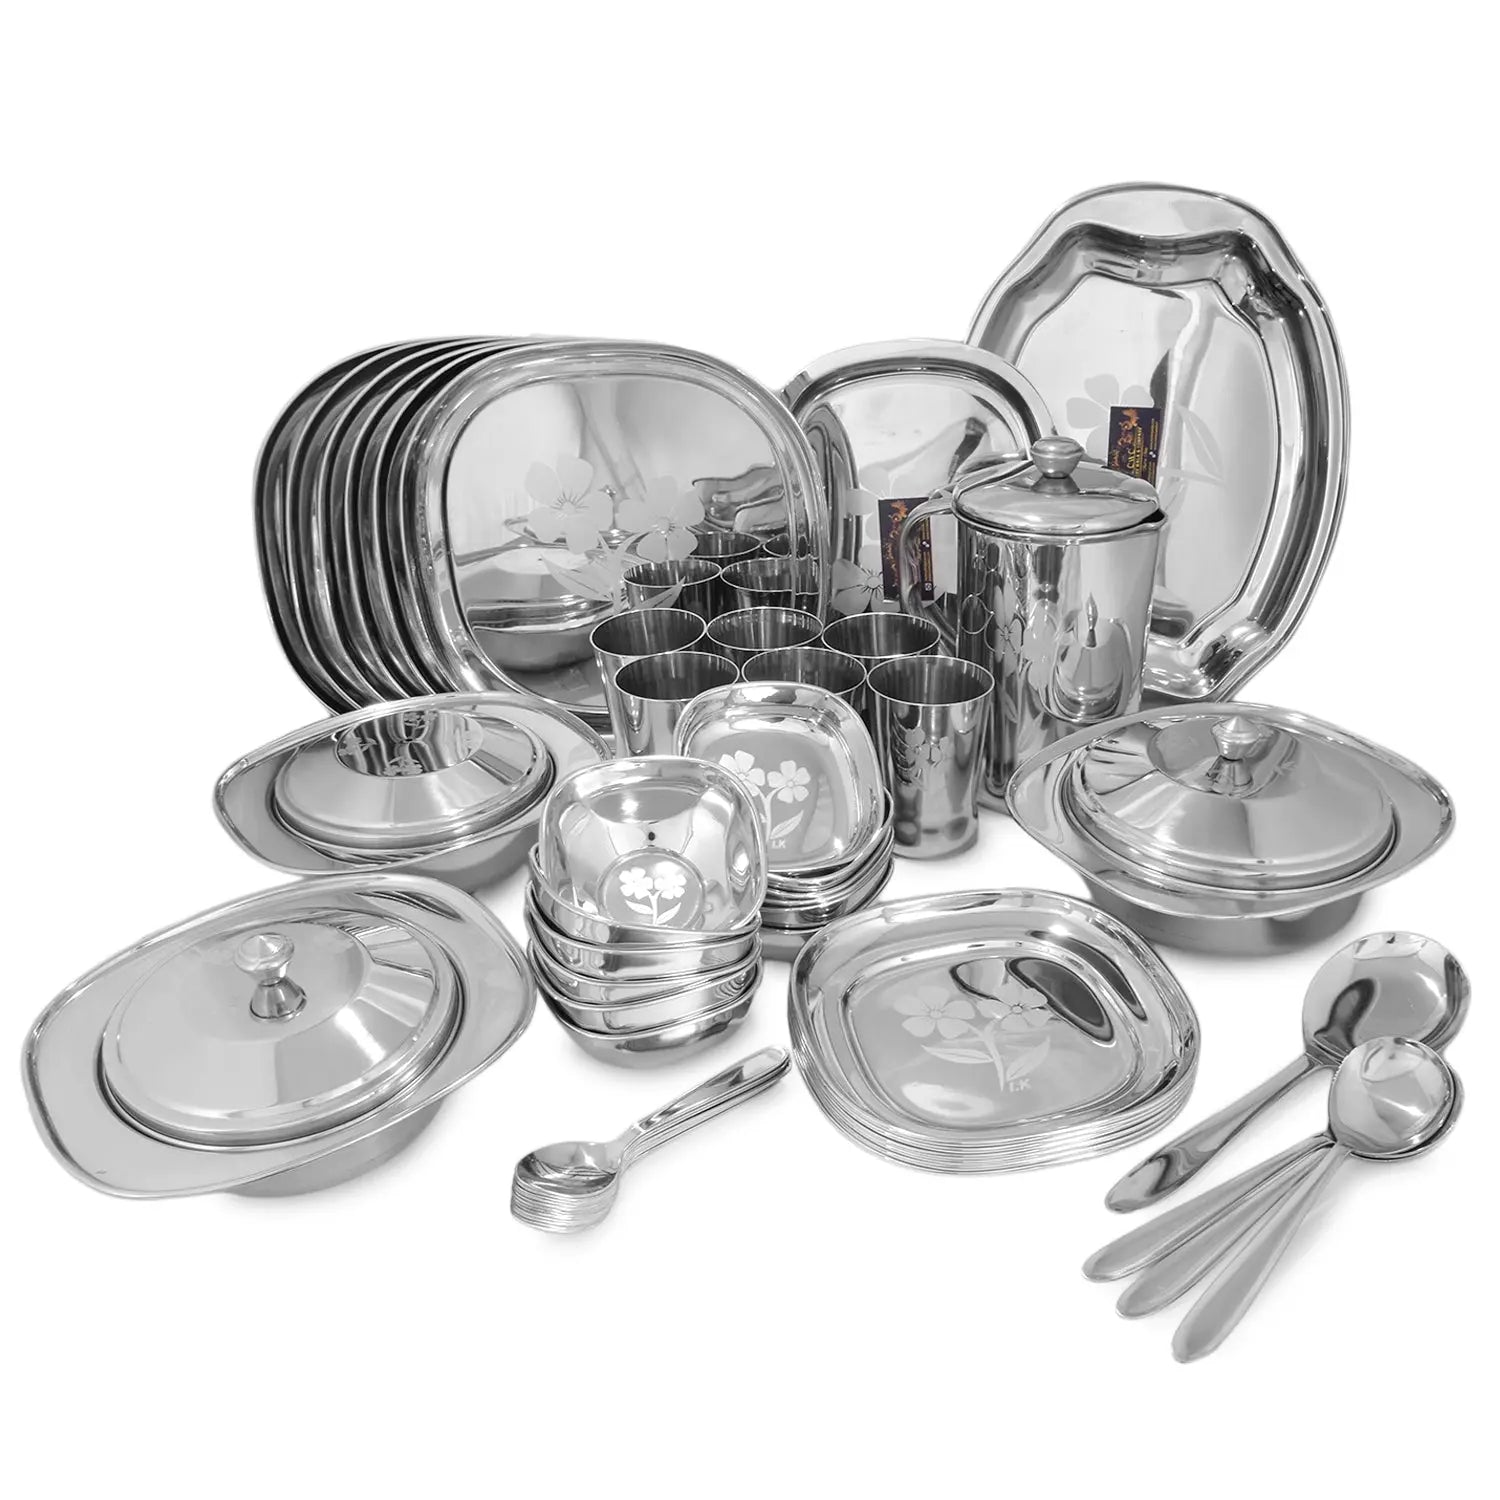 CROCKERY WALA AND COMPANY Laser Stainless Steel Dinner Set, 52 Piece, Square, Silver - Crockery Wala And Company